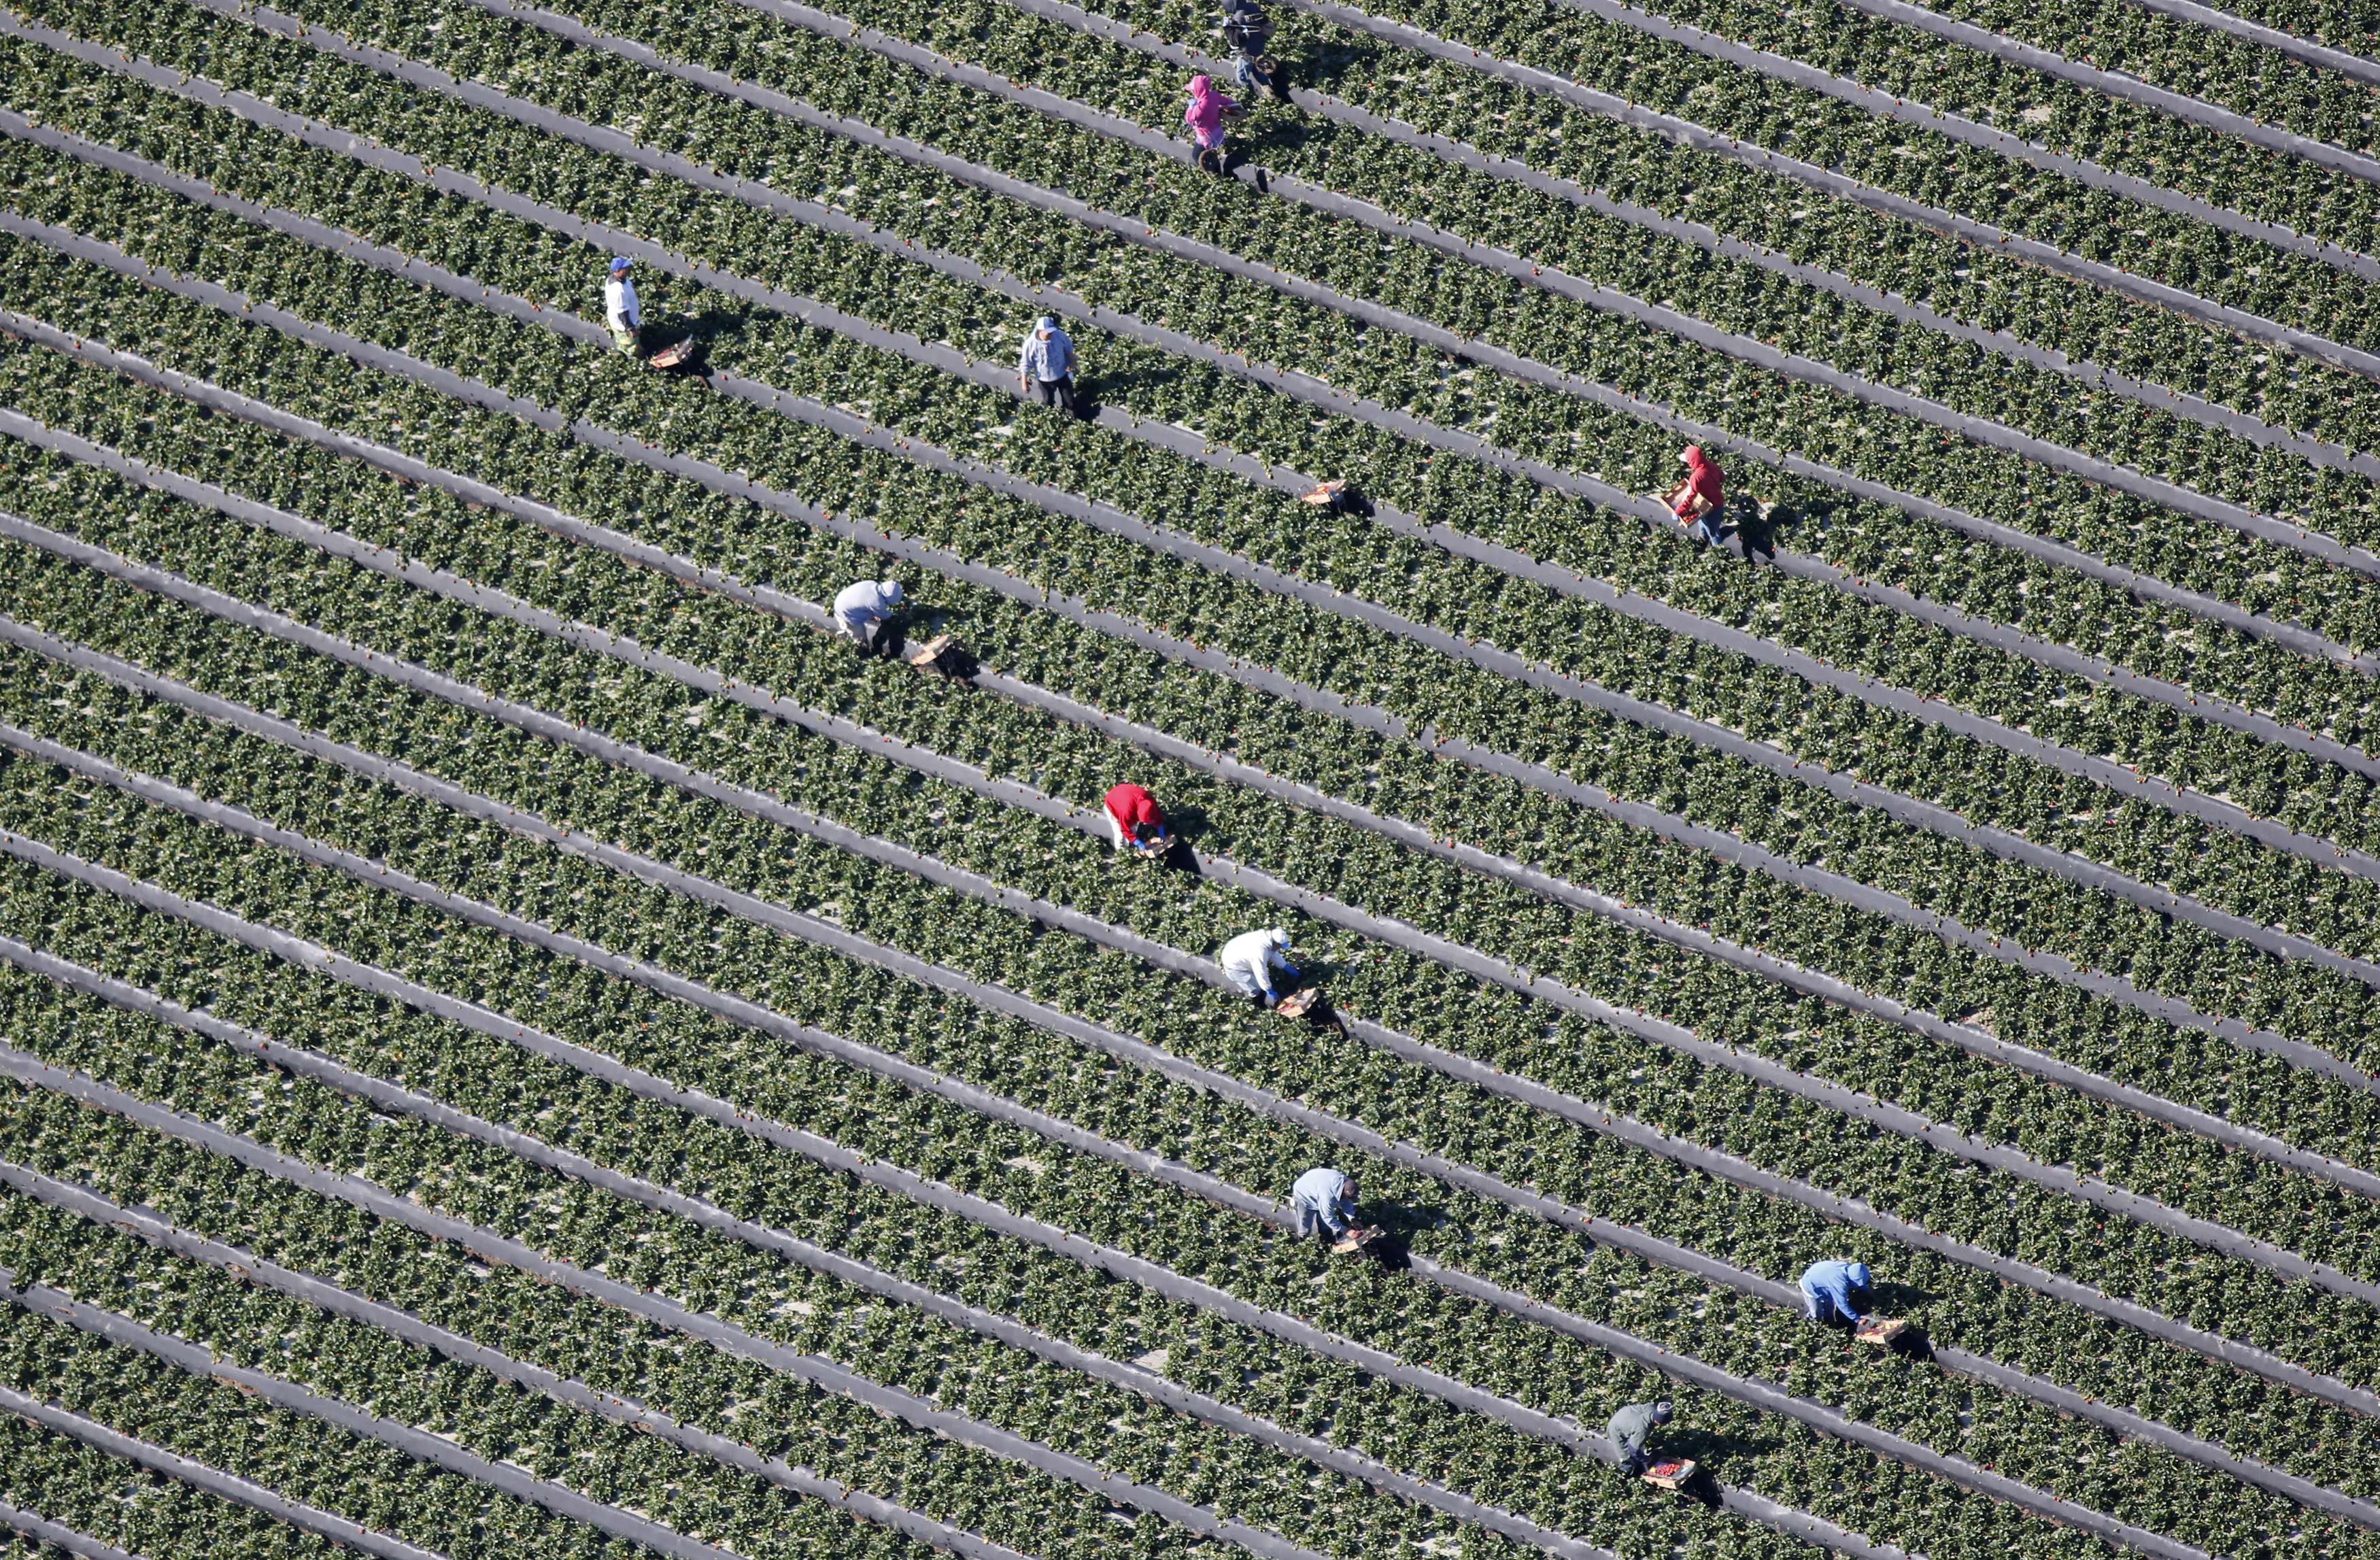 An aerial view shows field workers picking vegetables on a farm in Oxnard, California